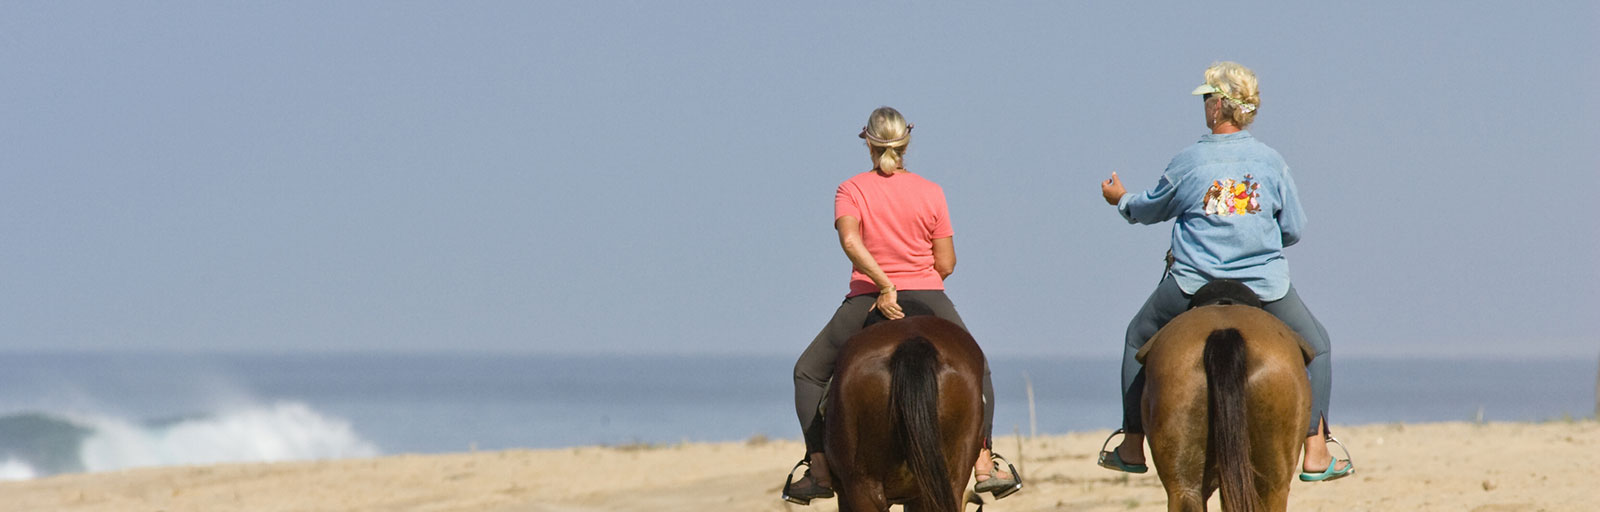 Horseback Riding & Yoga Retreat in Mexico: Beach Ride with Waves